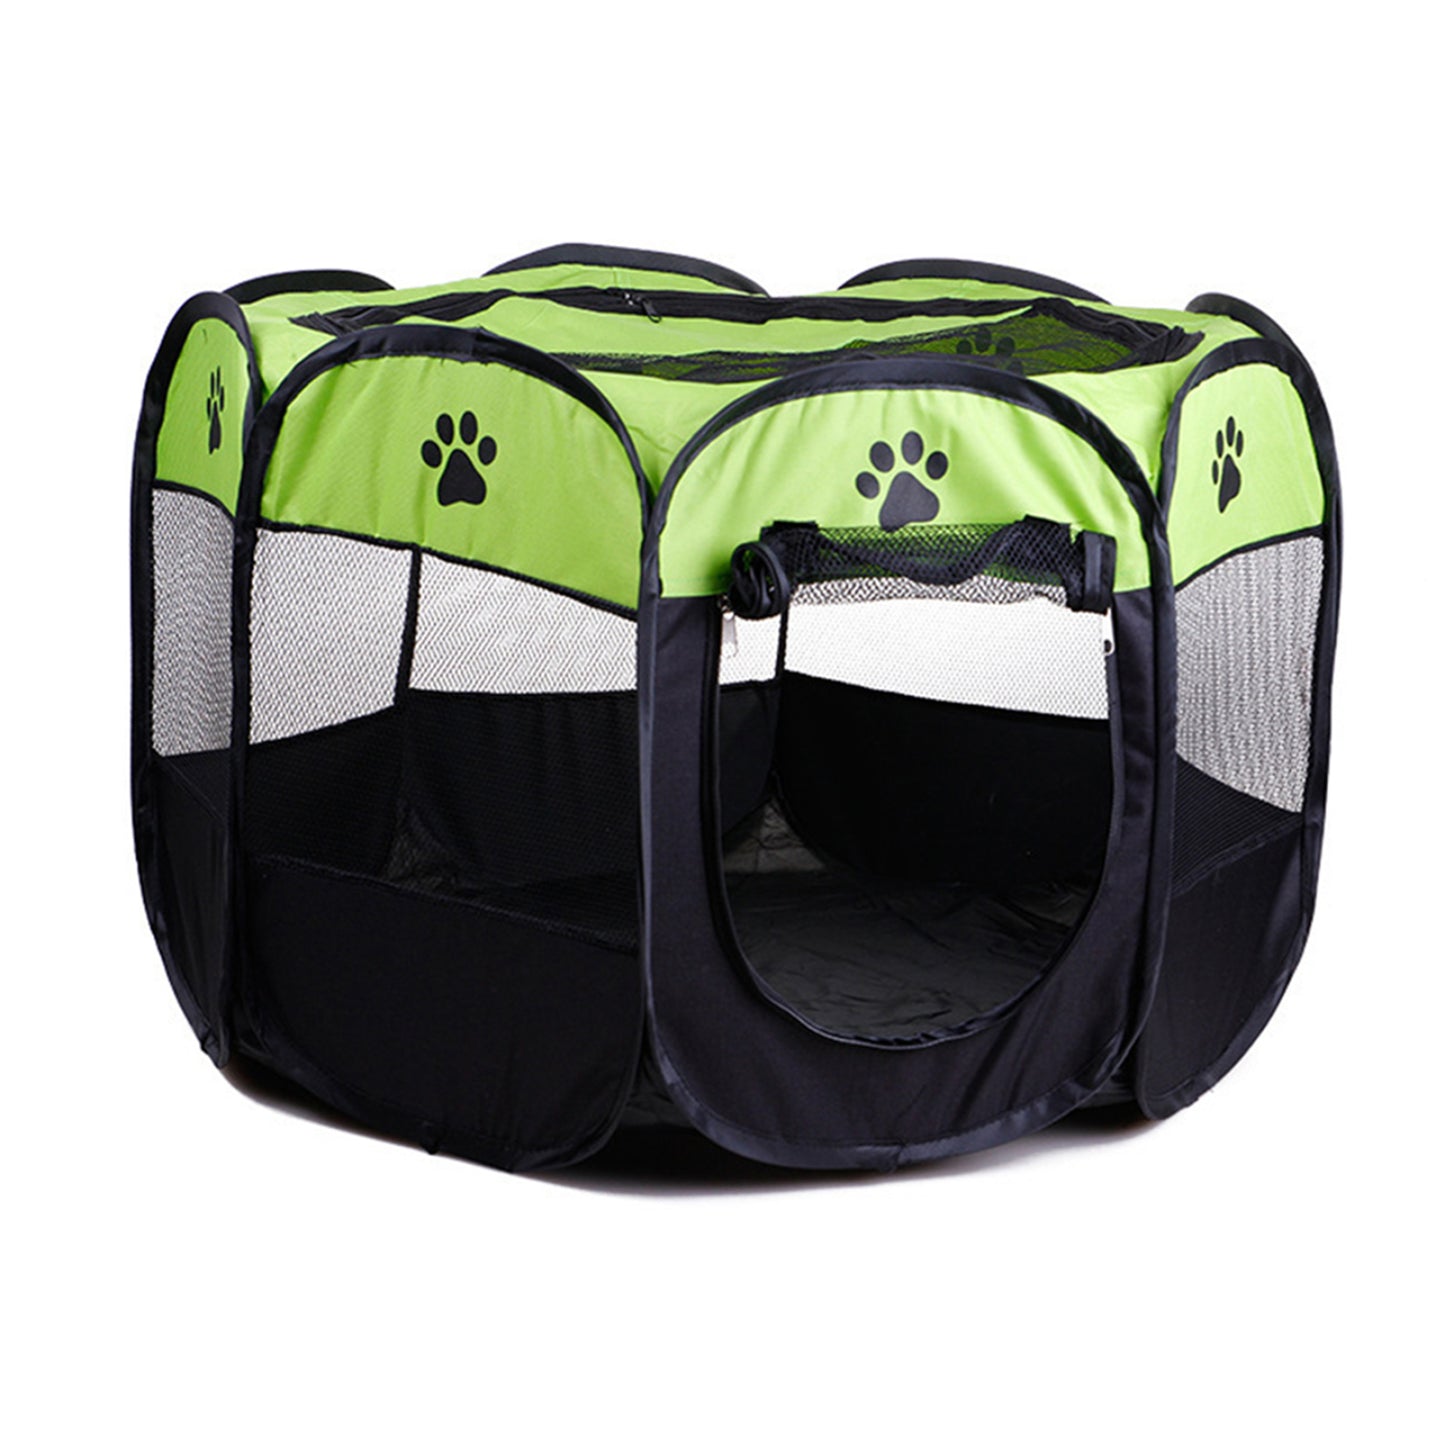 Bhxteng Portable Folding Pet Tent Octagonal Cage for Outdoor Big Dogs House